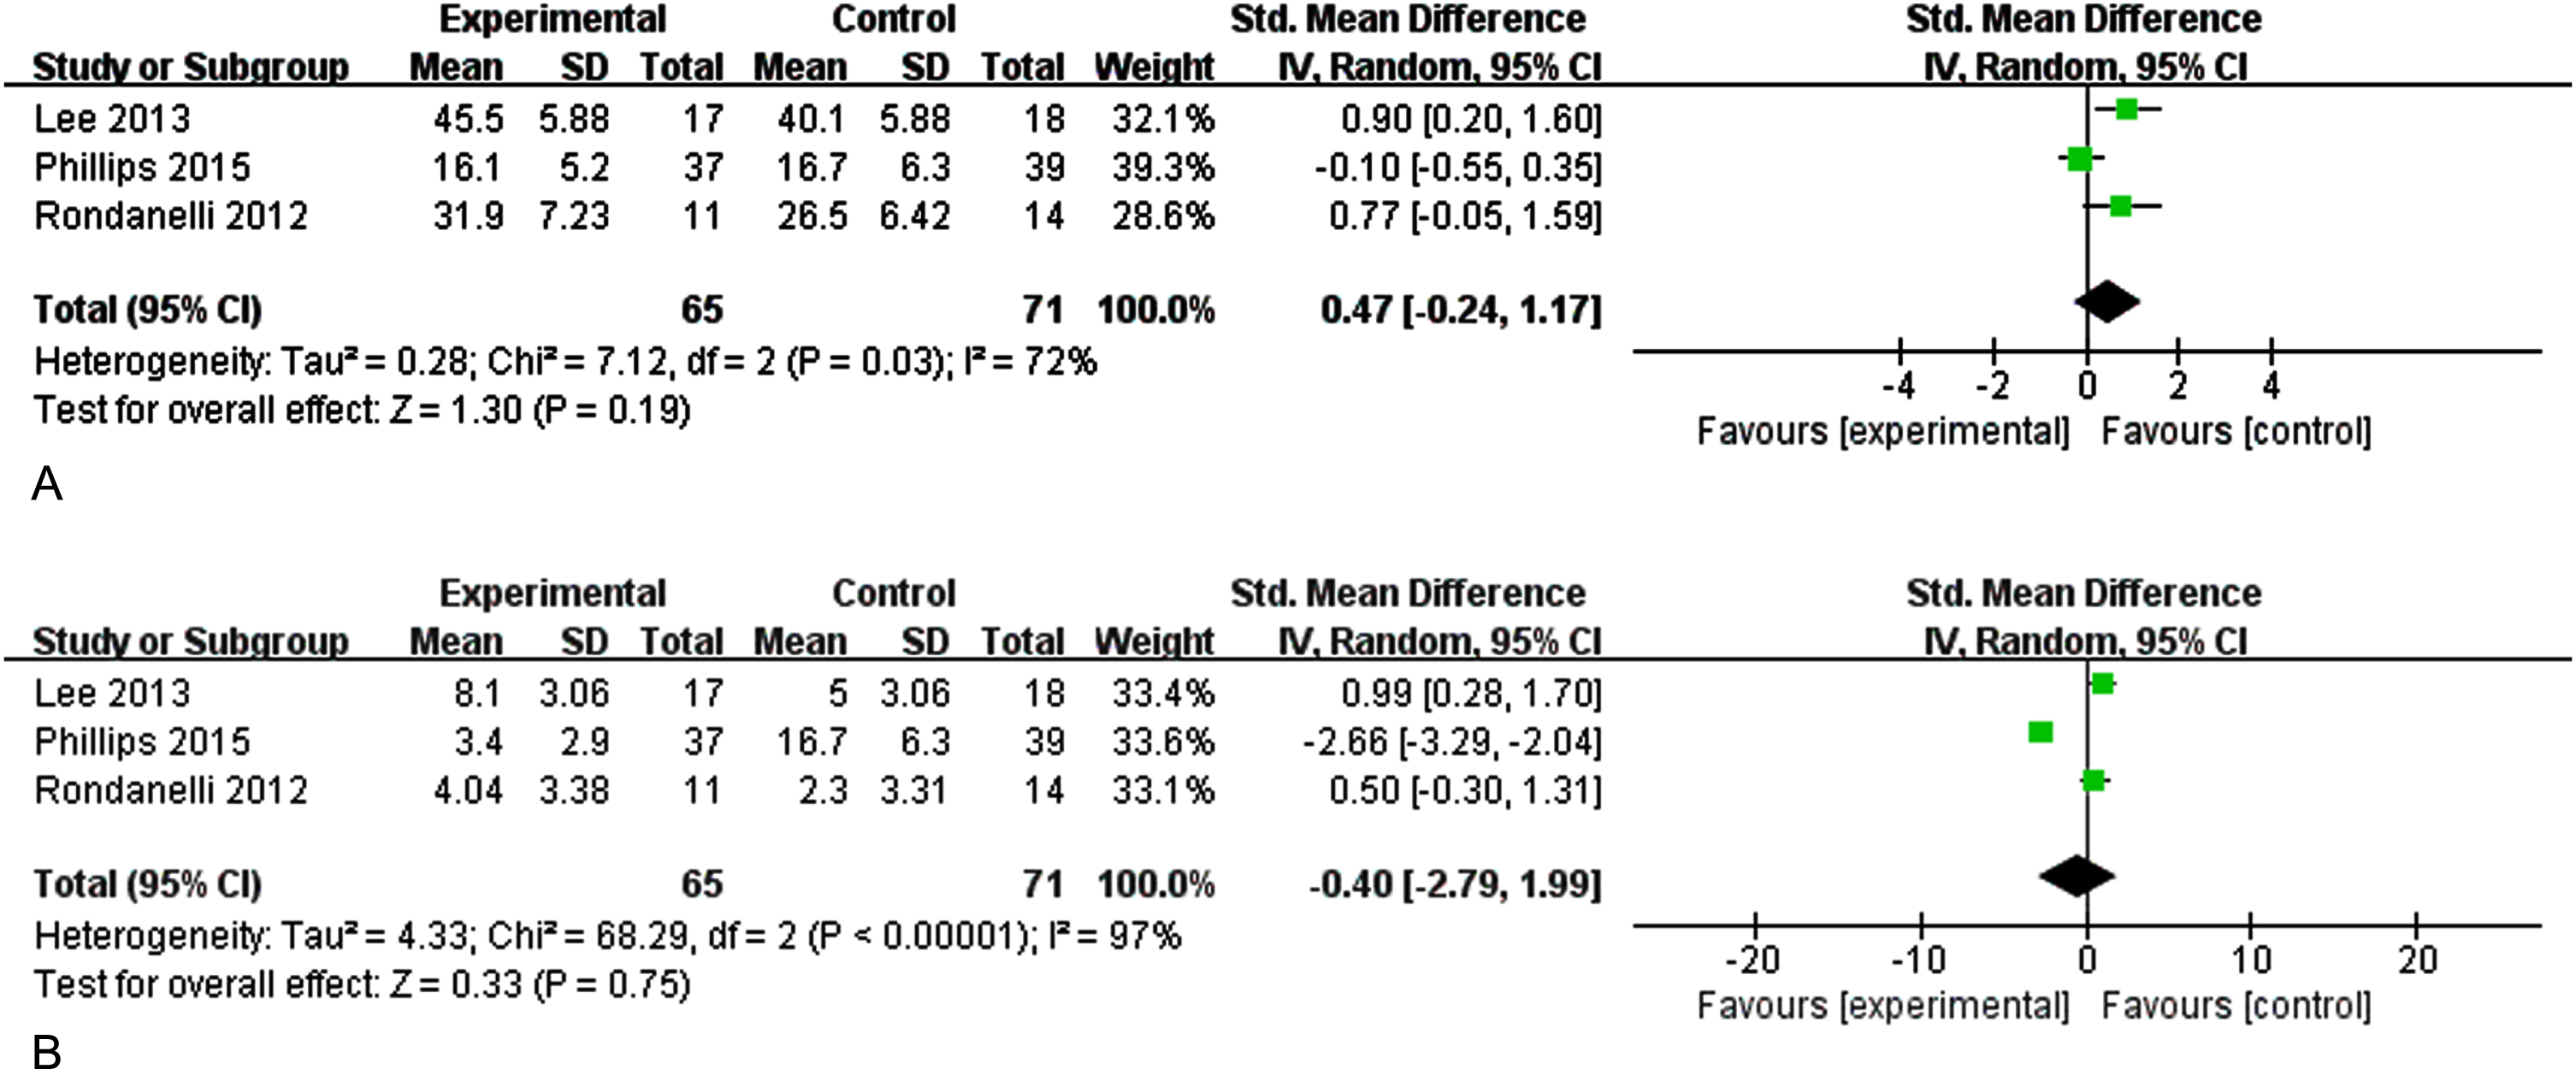 Forest plot for immediate memory. B. Forest plot for delayed memory. The effect of n-3CLPUFAs supplementation on memory (immediate and delayed memory) in older adults with MCI. A) Forest plot for immediate memory. Test for heterogeneity I2 = 72%, p = 0.03, the random effect model was used. The overall effect p = 0.19 >0.05, it shows that the intervention measures have no positive effect on immediate memory function of the elderly with MCI. B) Forest plot for delayed memory. Test for heterogeneity I2 = 97%, p <  0.001, the random effect model was used. The overall effect p = 0.75 >0.05, it shows that the intervention measures have no positive effect on delayed memory function of the elderly with MCI.